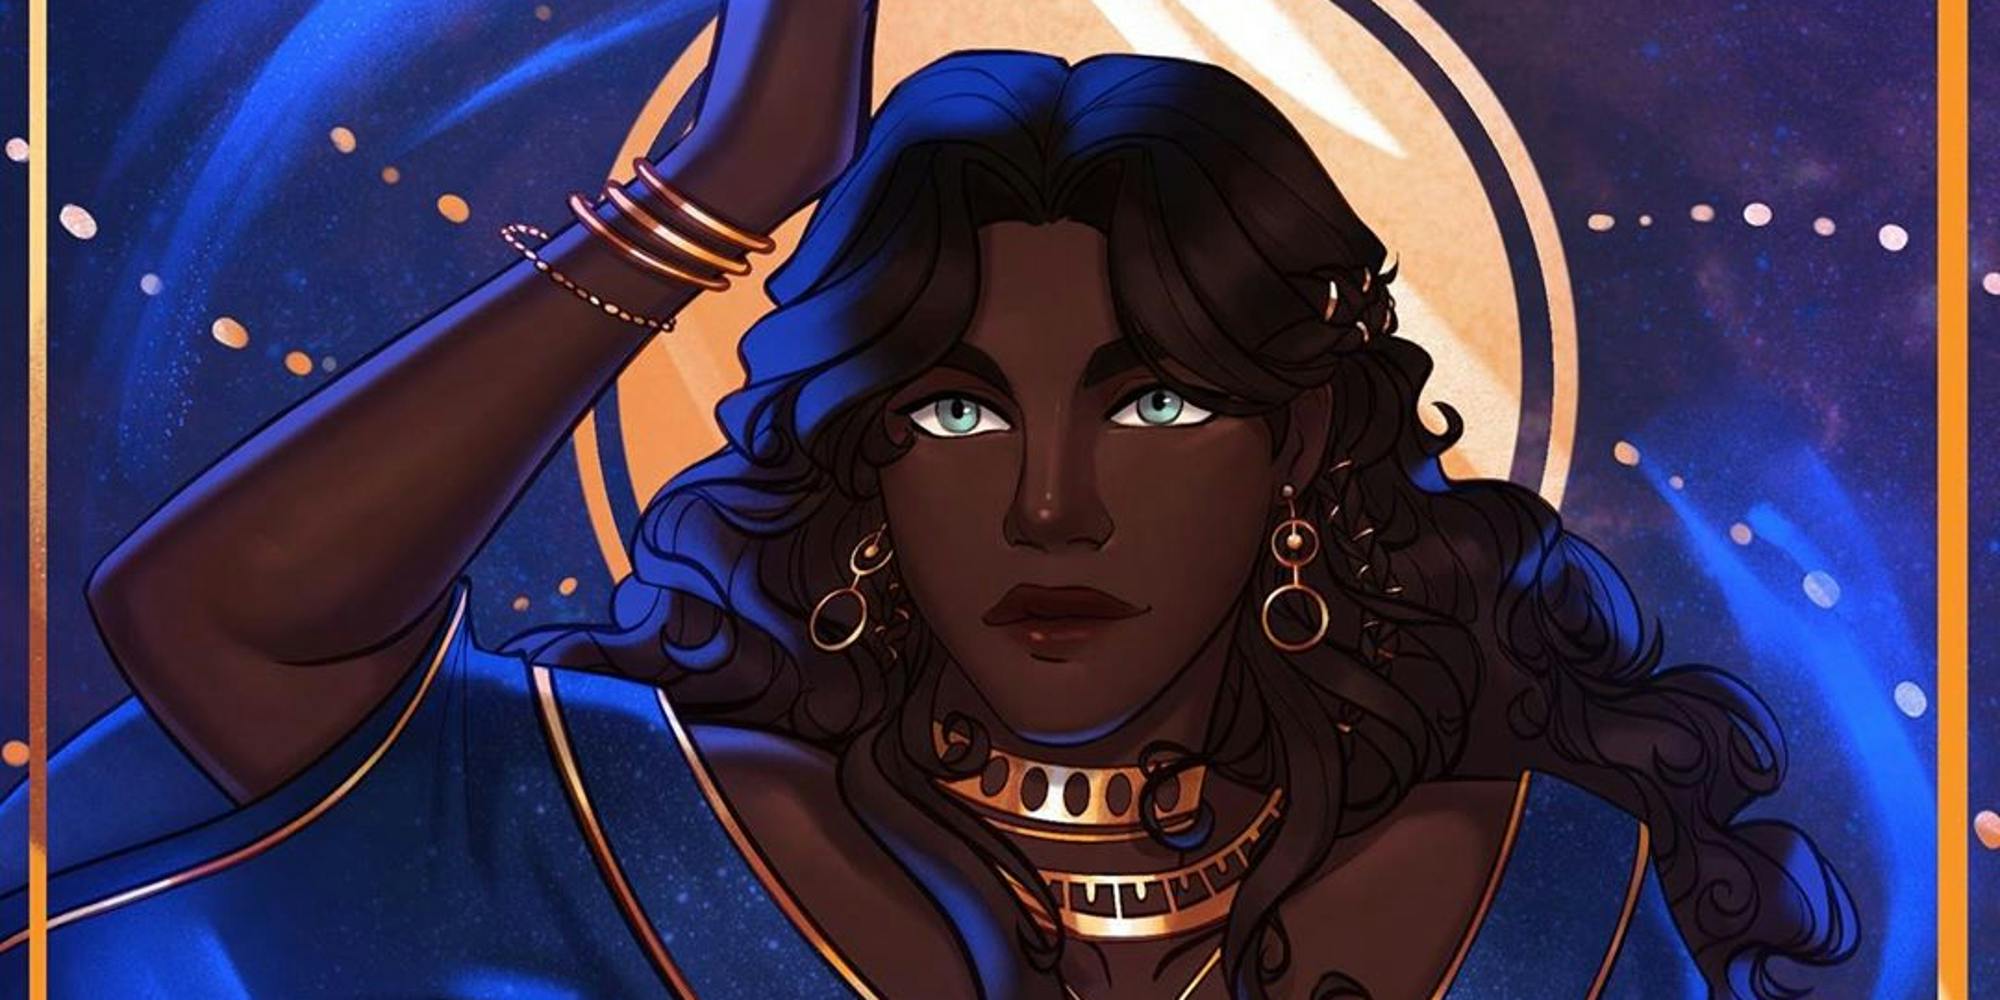 This NSFW visual novel deal is raising funds for Black trans people